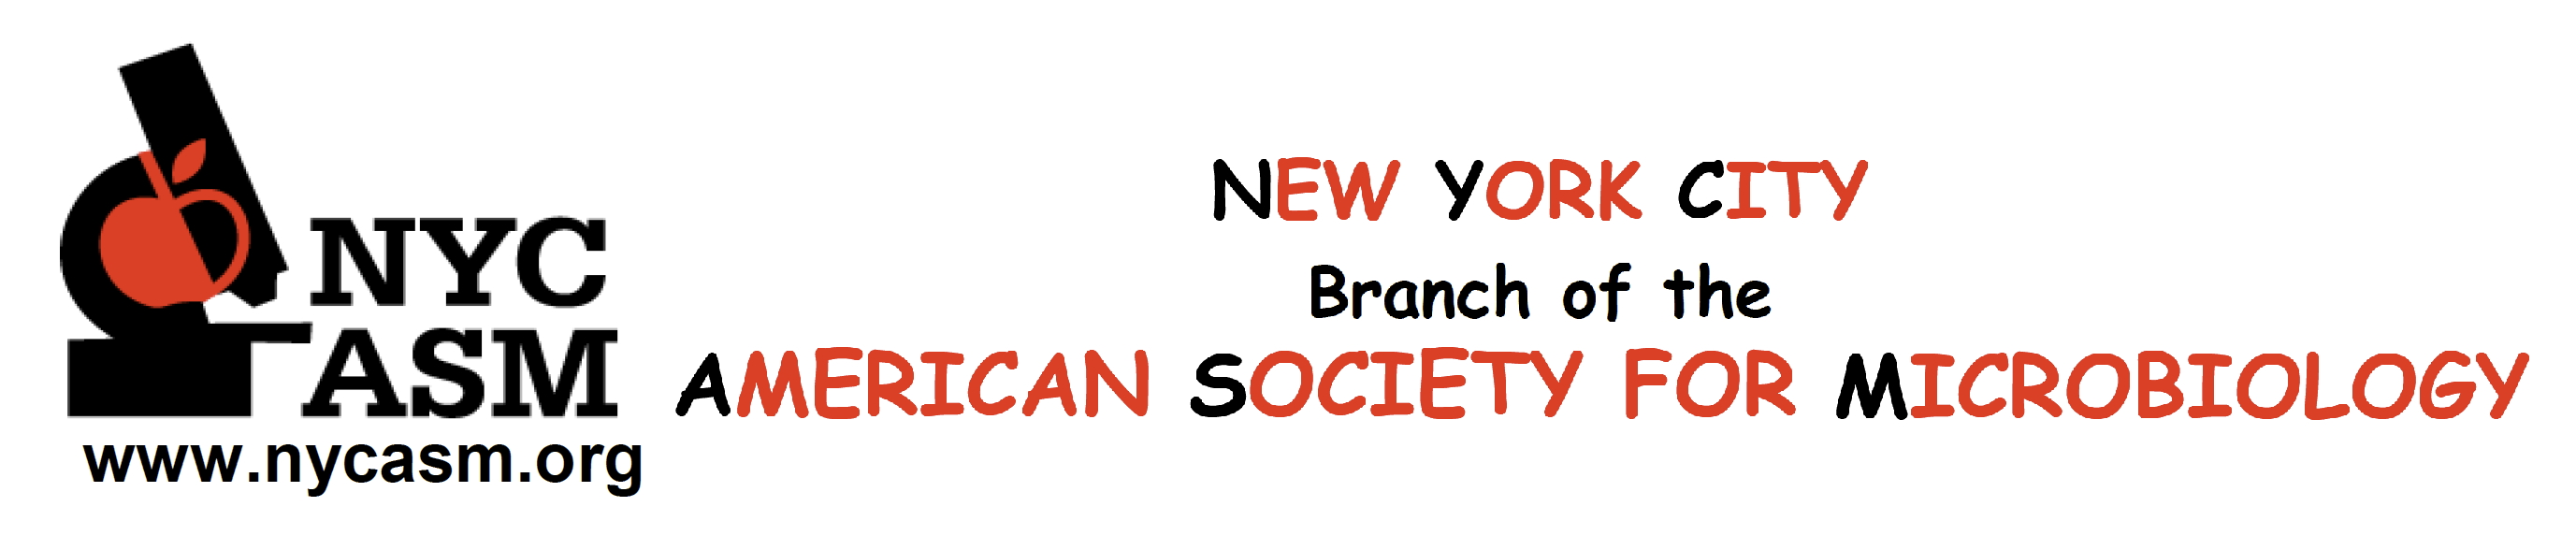 New York City Branch of the American Society of Microbiology - 